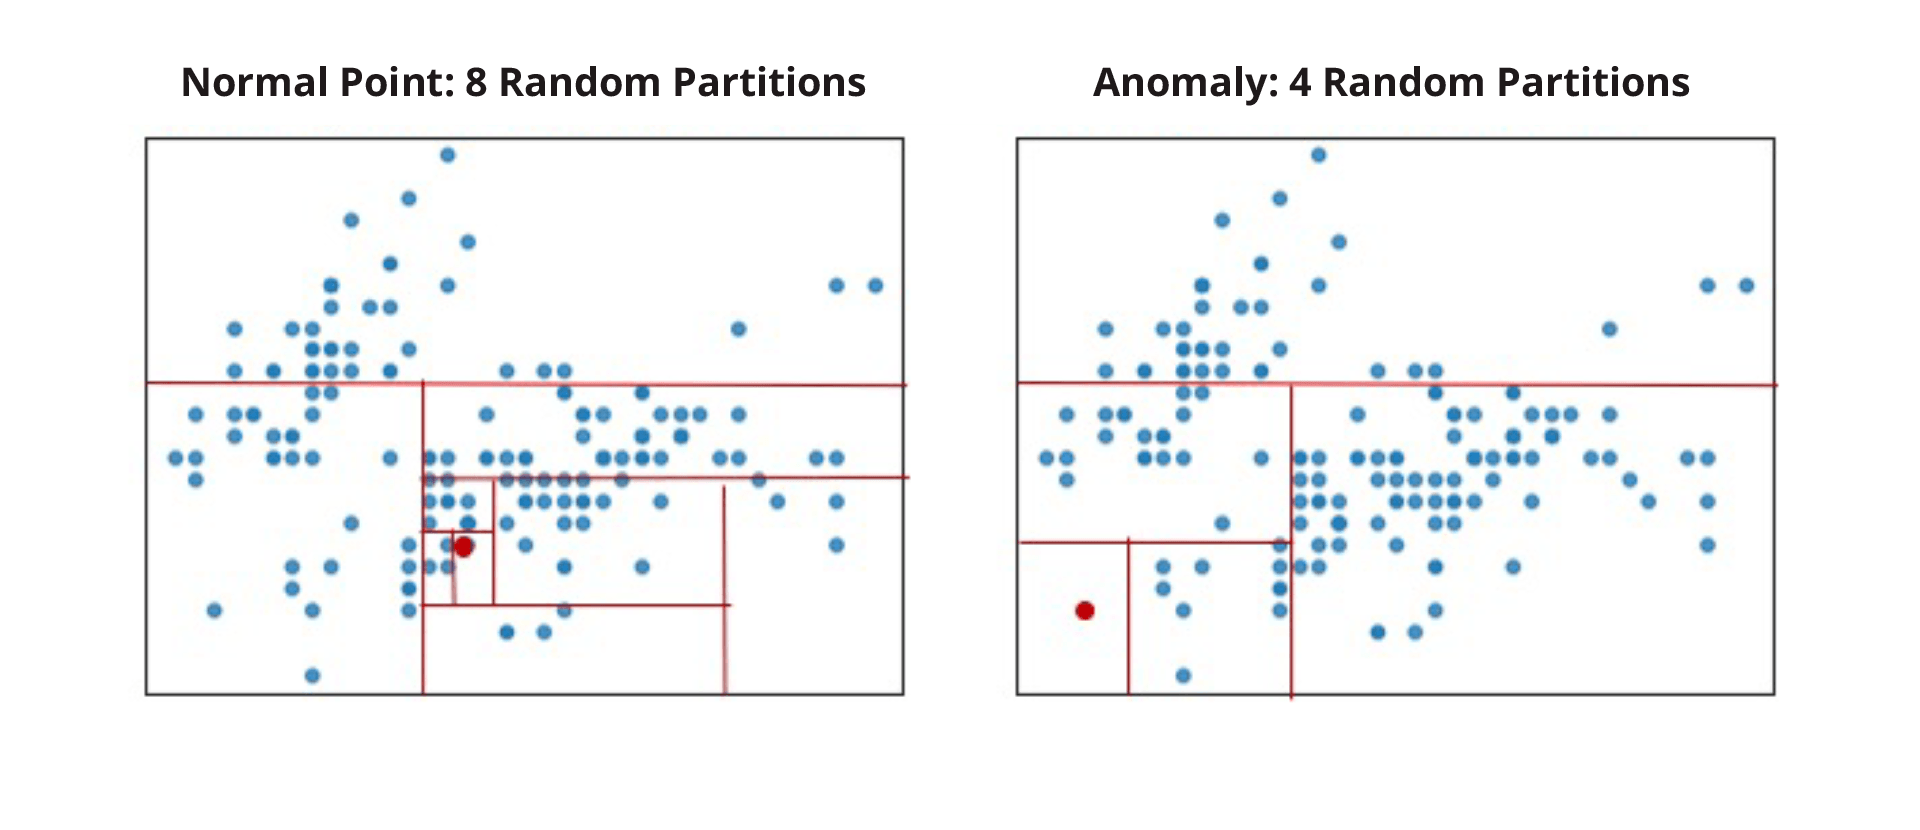 Normal and Anomaly point differences